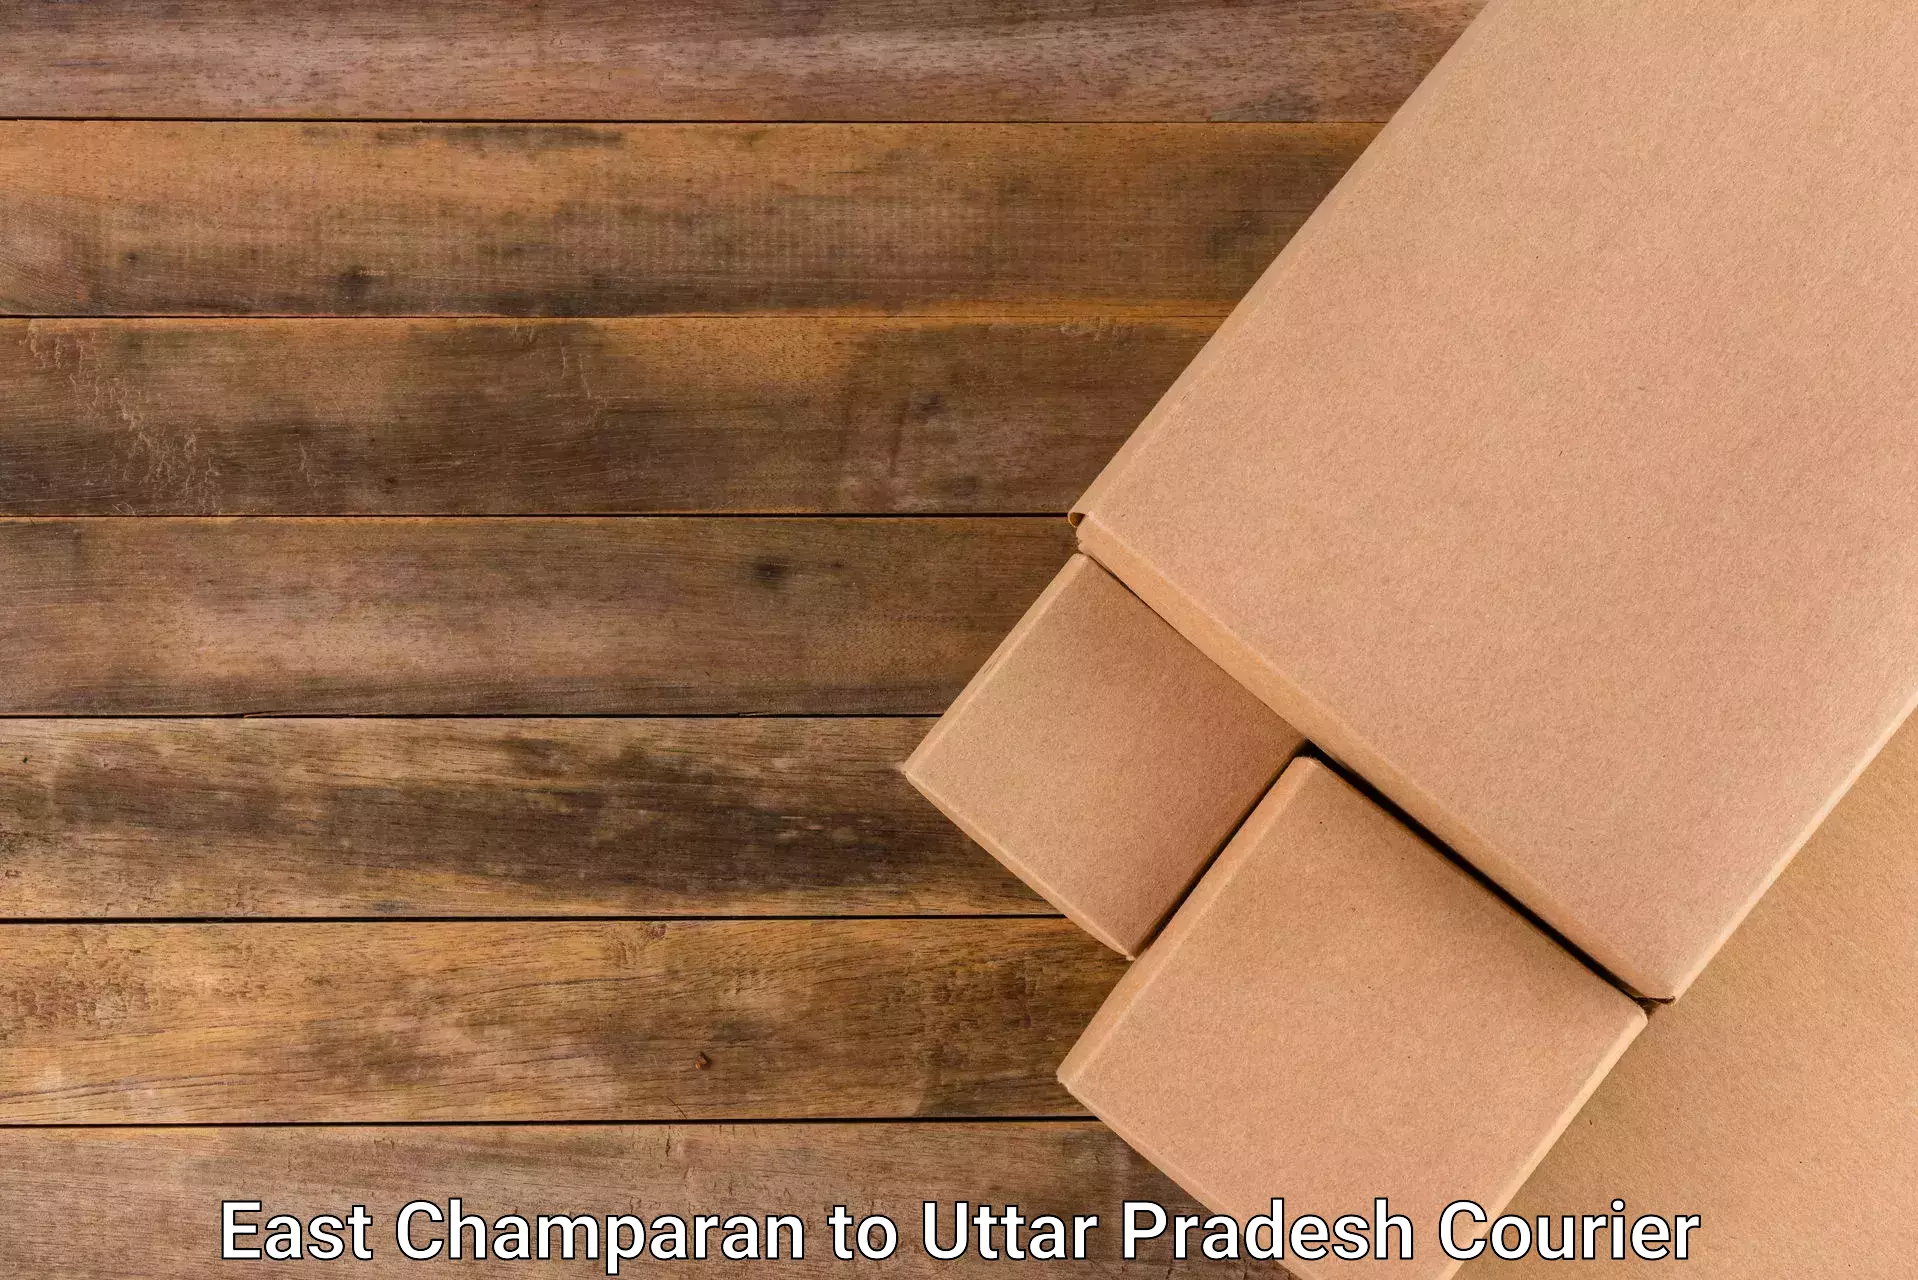 Rapid shipping services East Champaran to Dadri